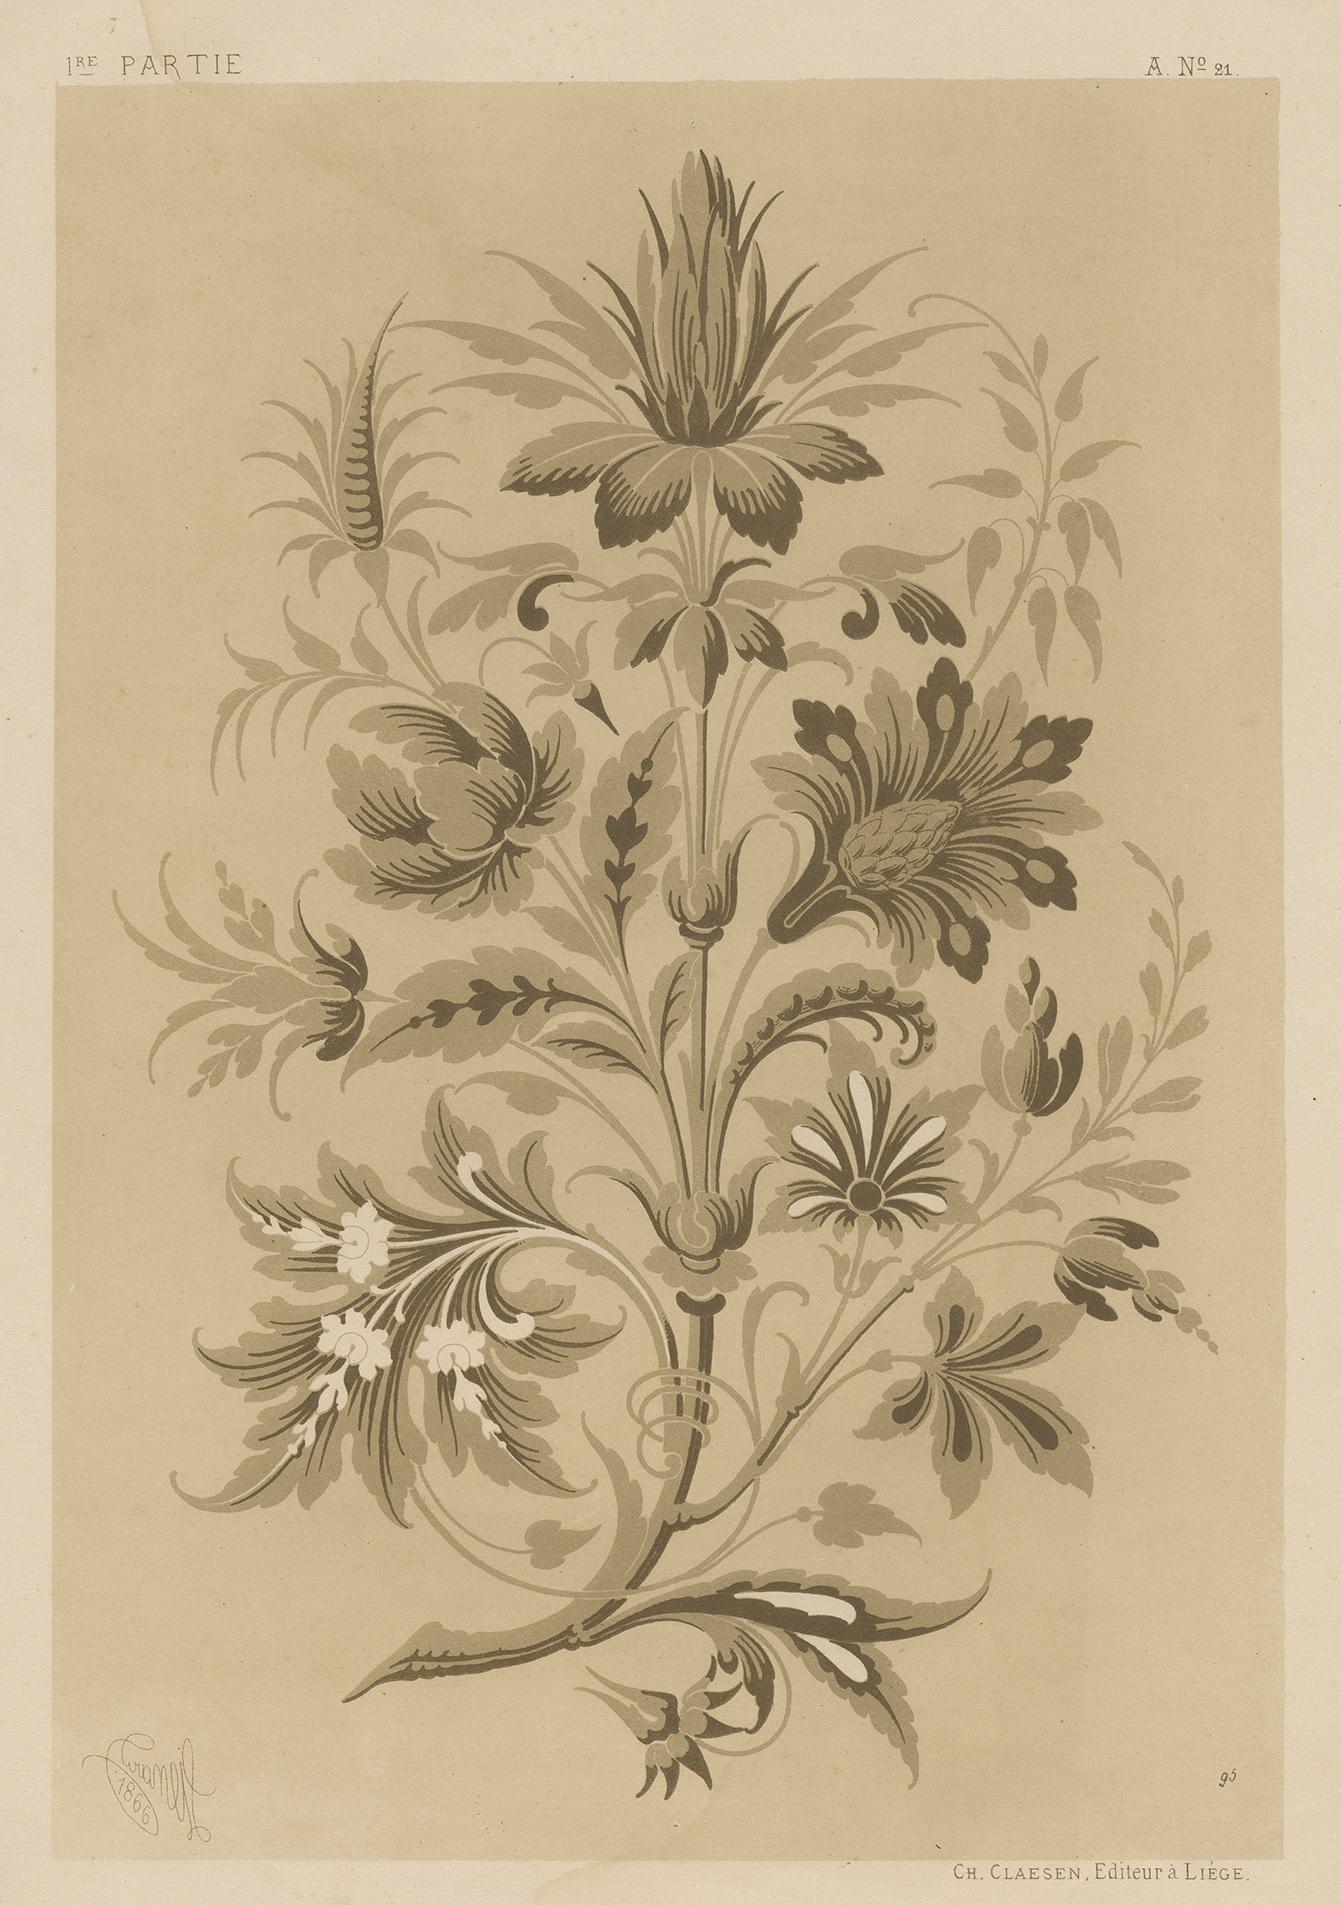 Lithograph of a wallpaper design. It shows a branch with stylized leaves and flowers. Published by Charles Claesen.